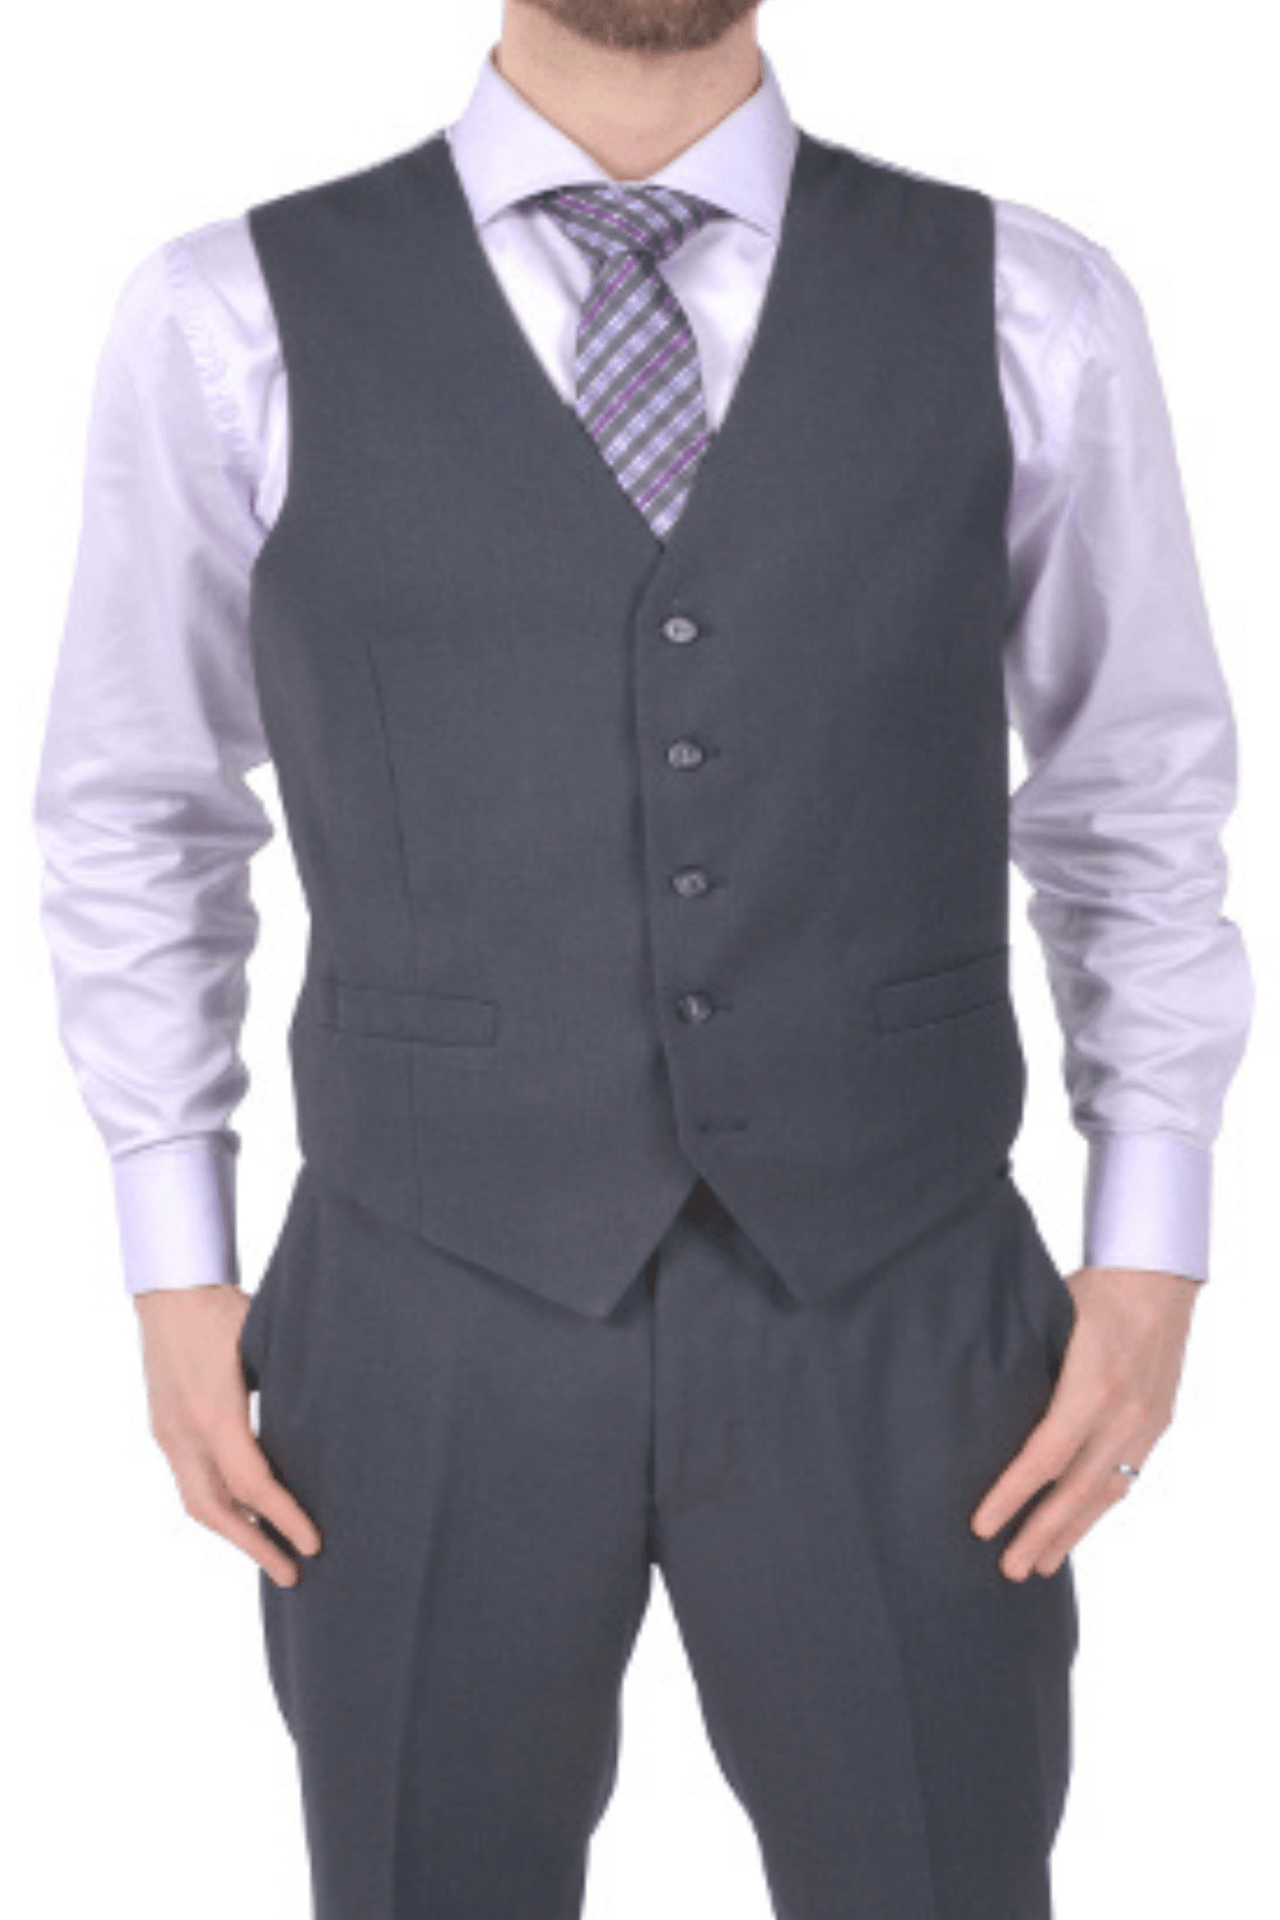 Charcoal Tailor's Stretch Collection Vest - Tomasso Black